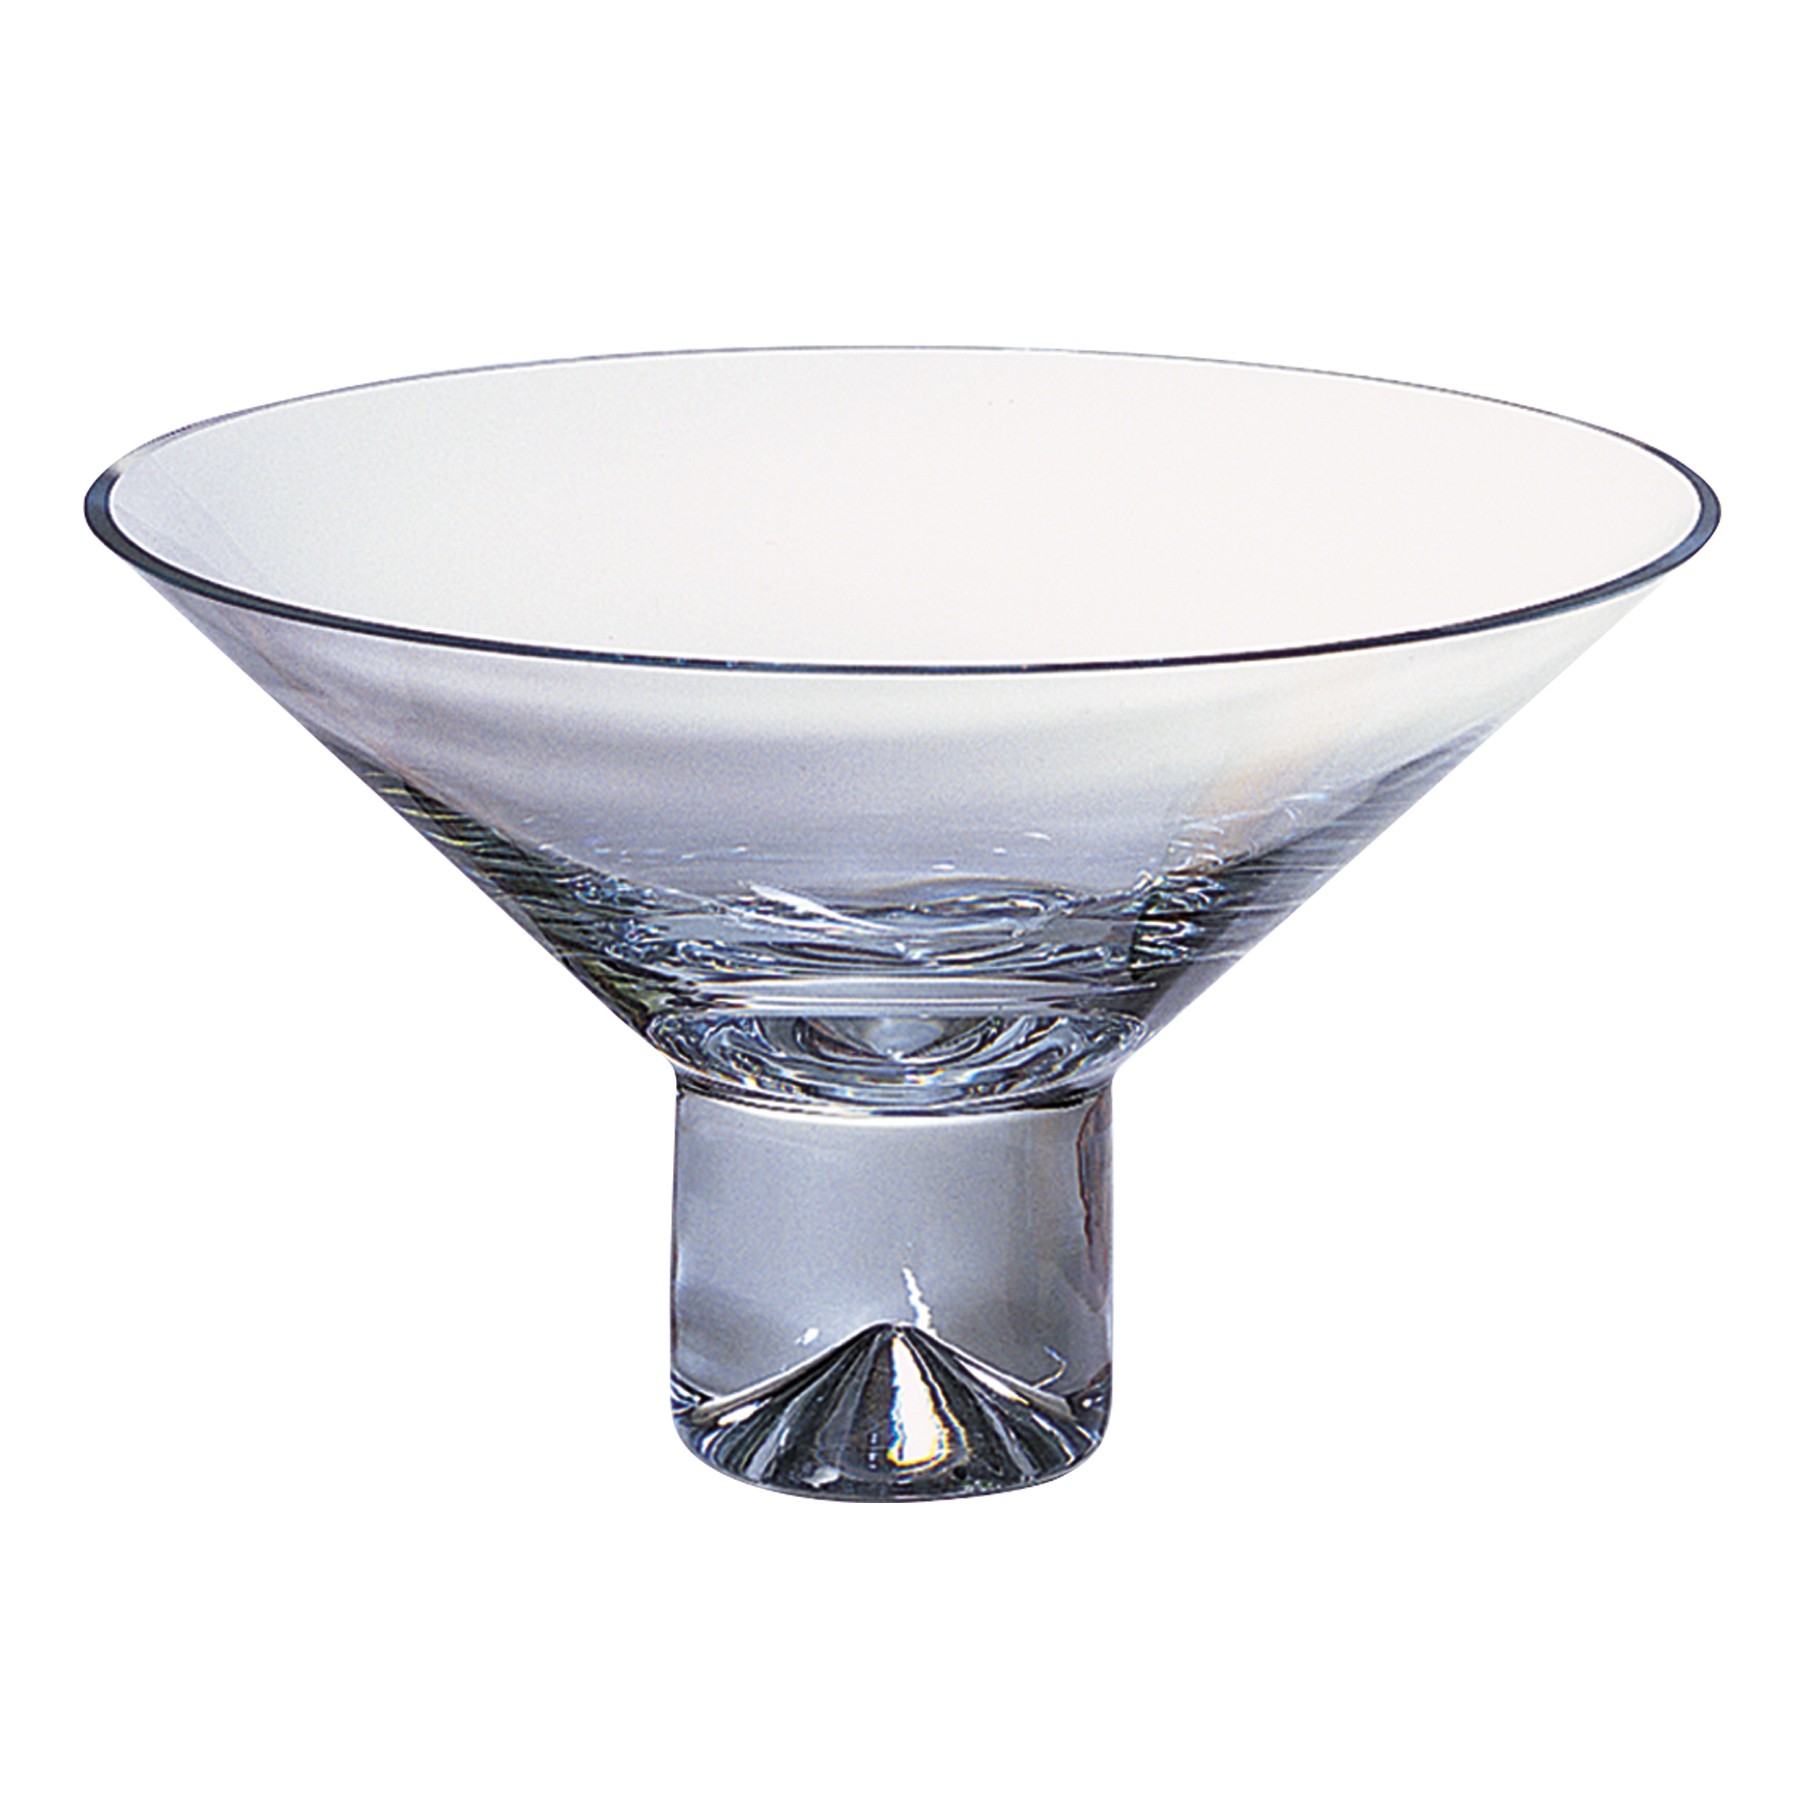 11" Mouth Blown Crystal Centerpiece or Fruit Bowl